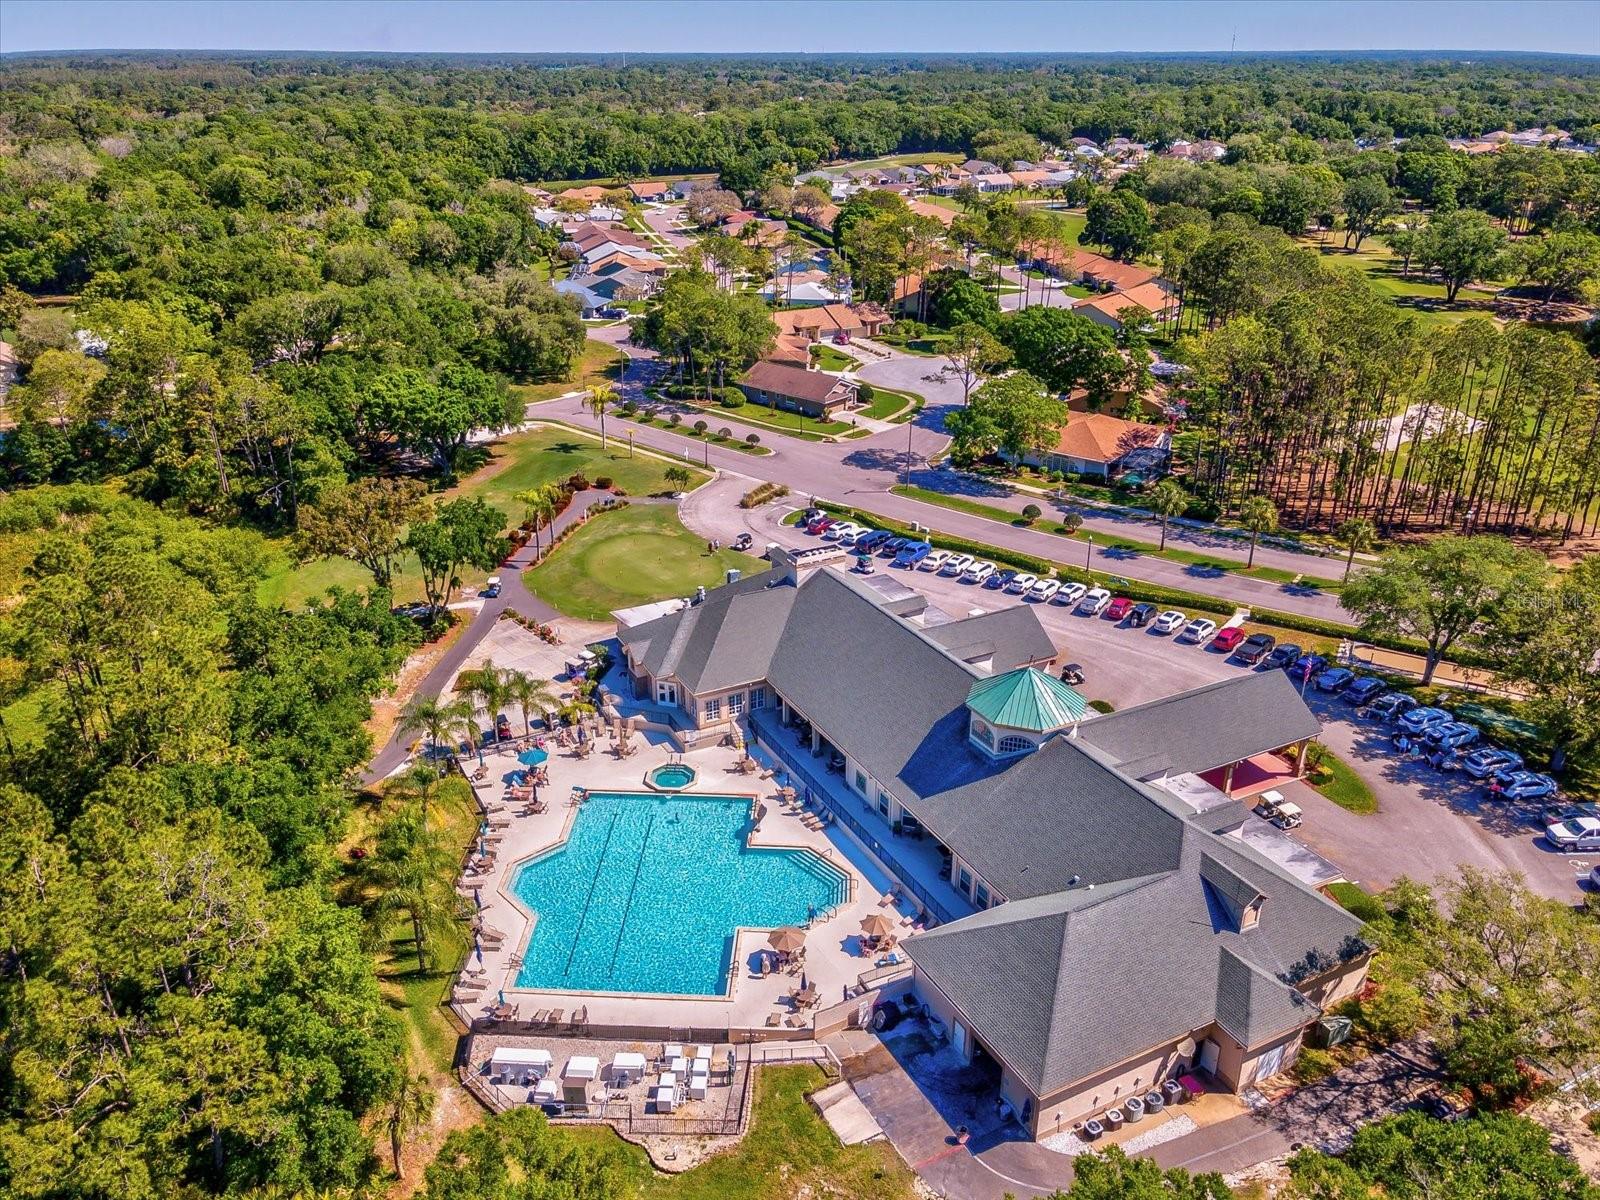 Drone views of Timber Greens clubhouse, amenities and neighborhoods